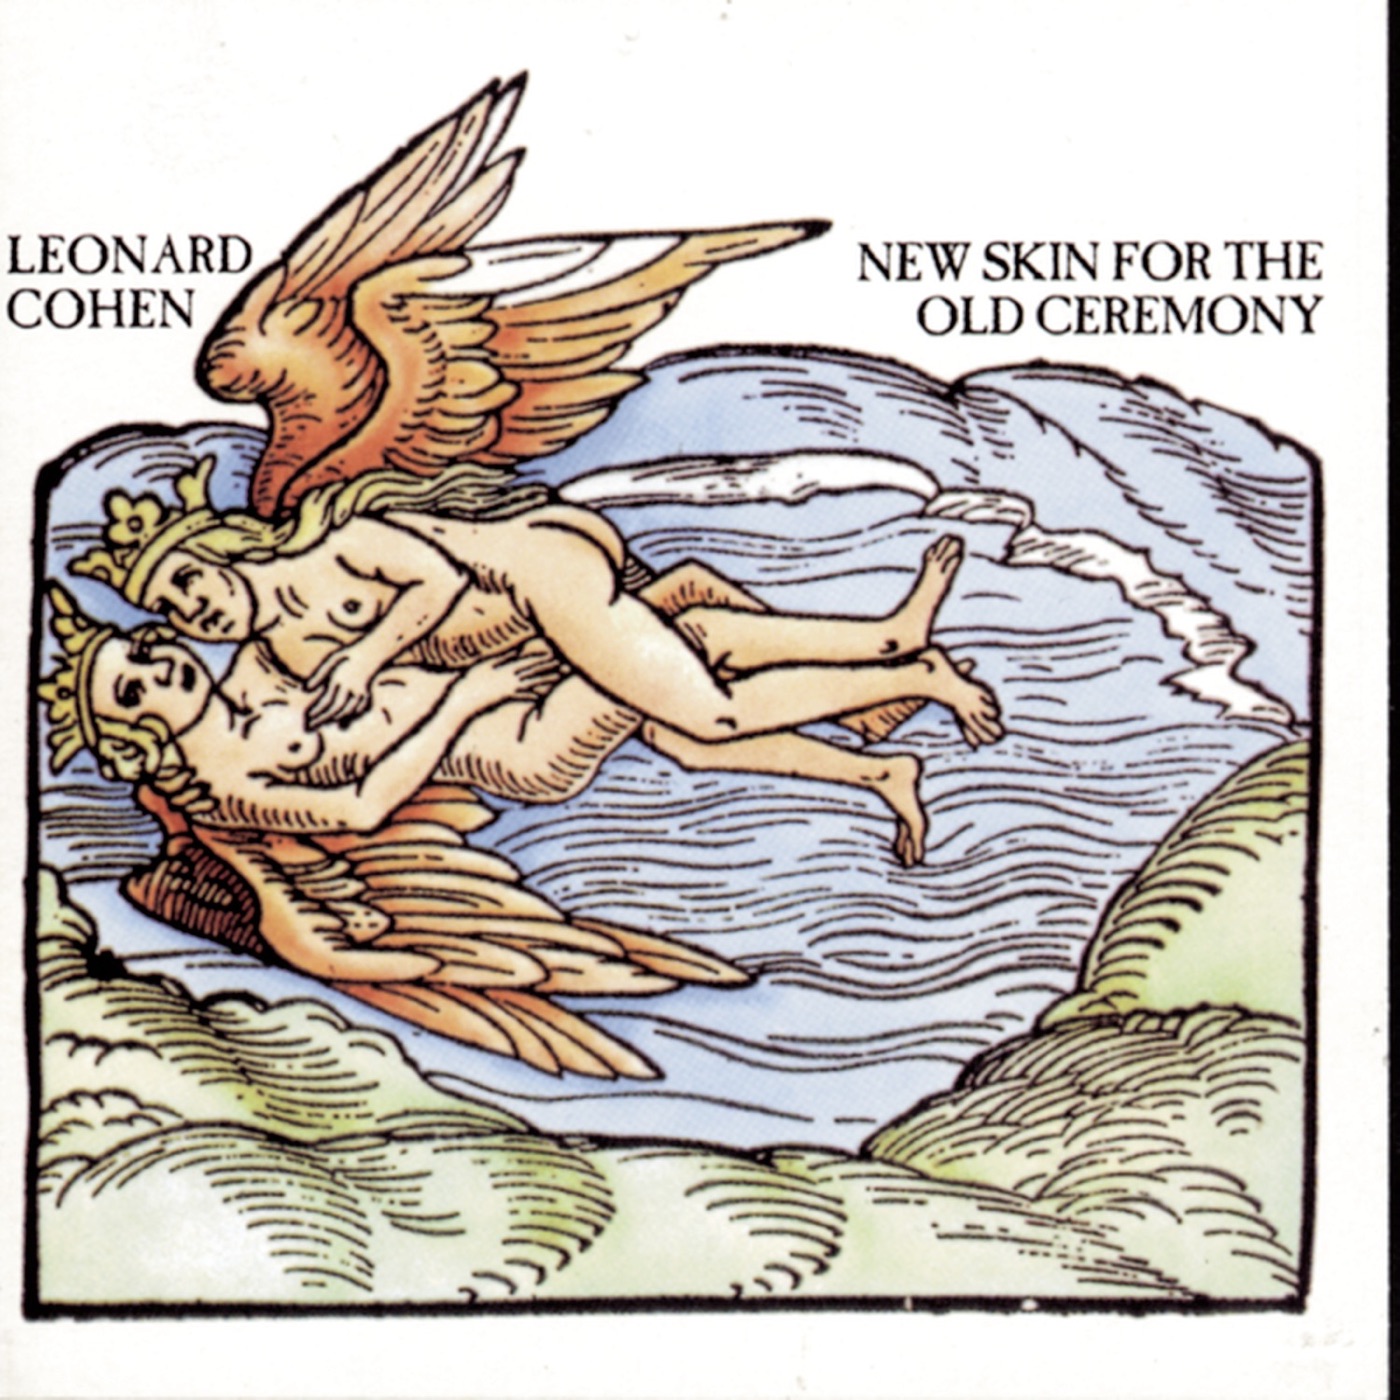 New Skin for the Old Ceremony by Leonard Cohen